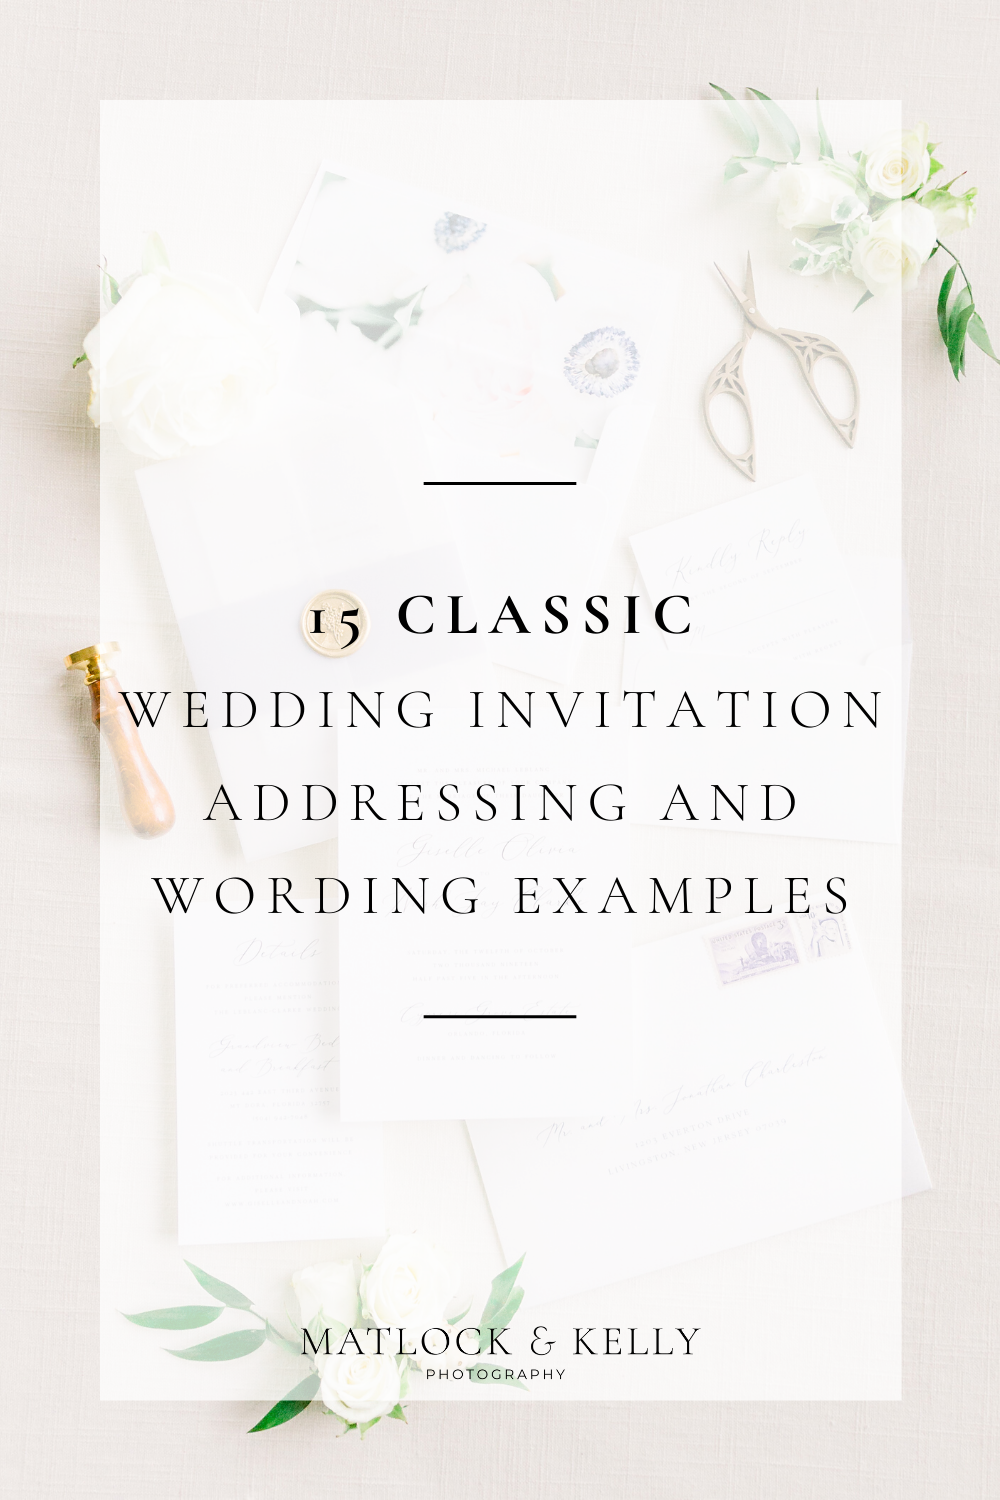 15 classic wedding invitation wording examples from Matlock and Kelly!